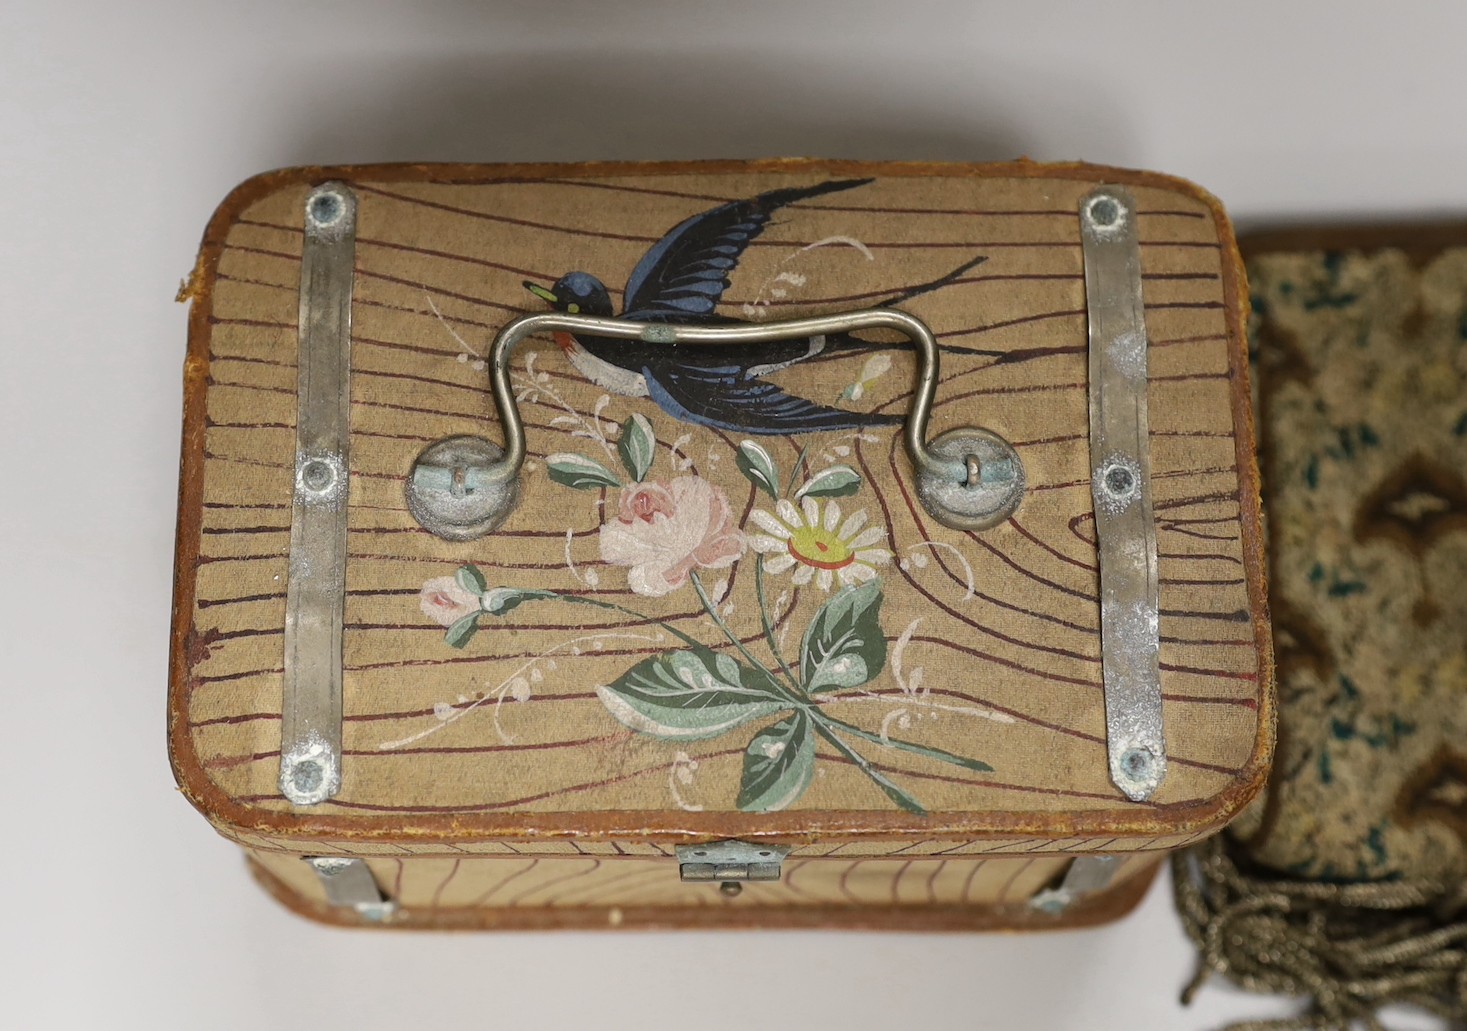 A suitcase containing a collection of late 19th century leather sewing bags and containers, wooden darning mushrooms, etc